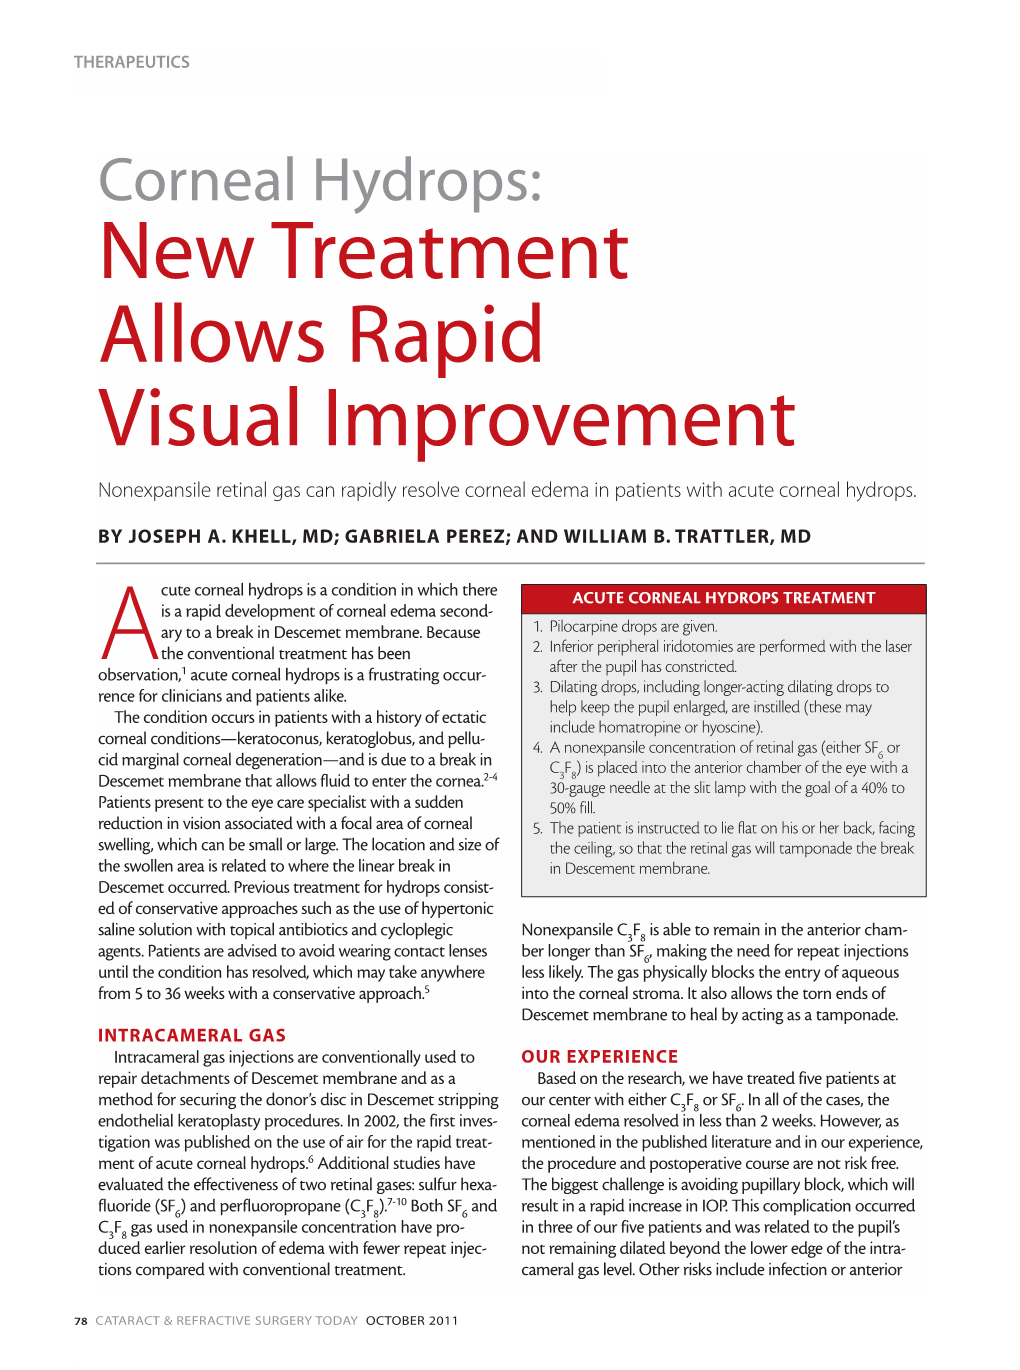 New Treatment Allows Rapid Visual Improvement Nonexpansile Retinal Gas Can Rapidly Resolve Corneal Edema in Patients with Acute Corneal Hydrops